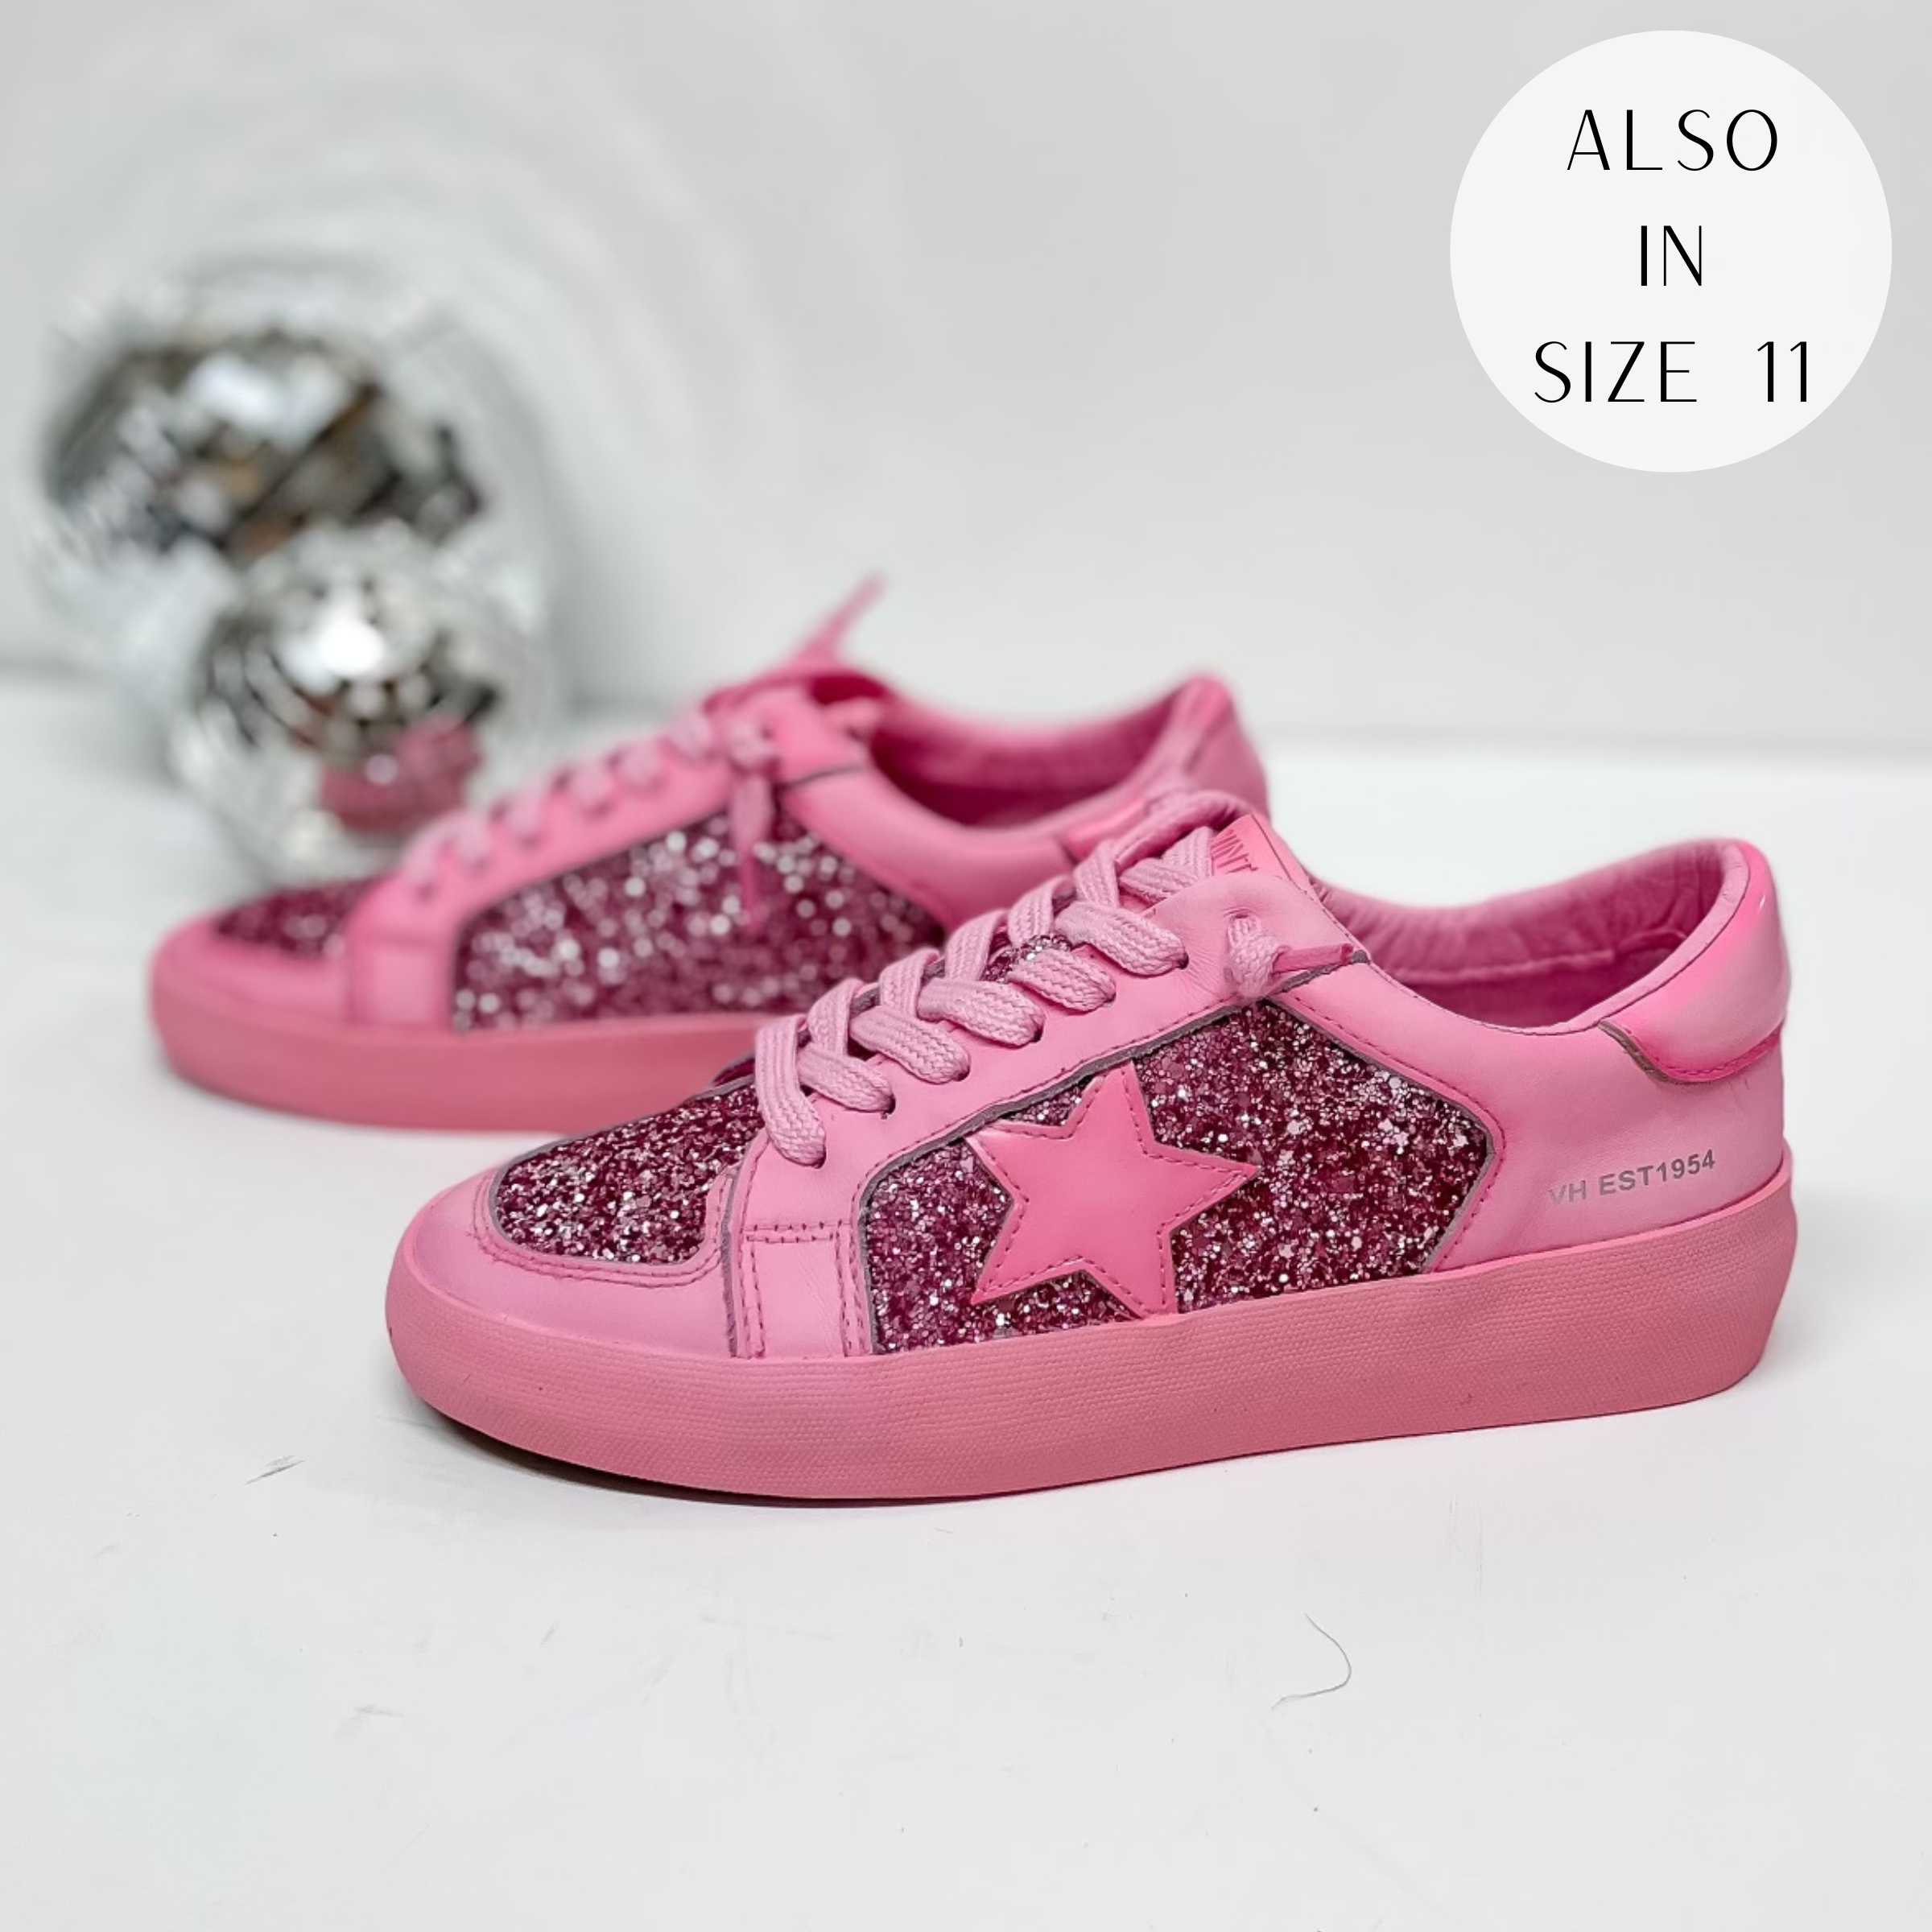 Vintage Havana | Alexis Dip Dye Glitter Sneakers in Hot Pink - Giddy Up Glamour Boutique